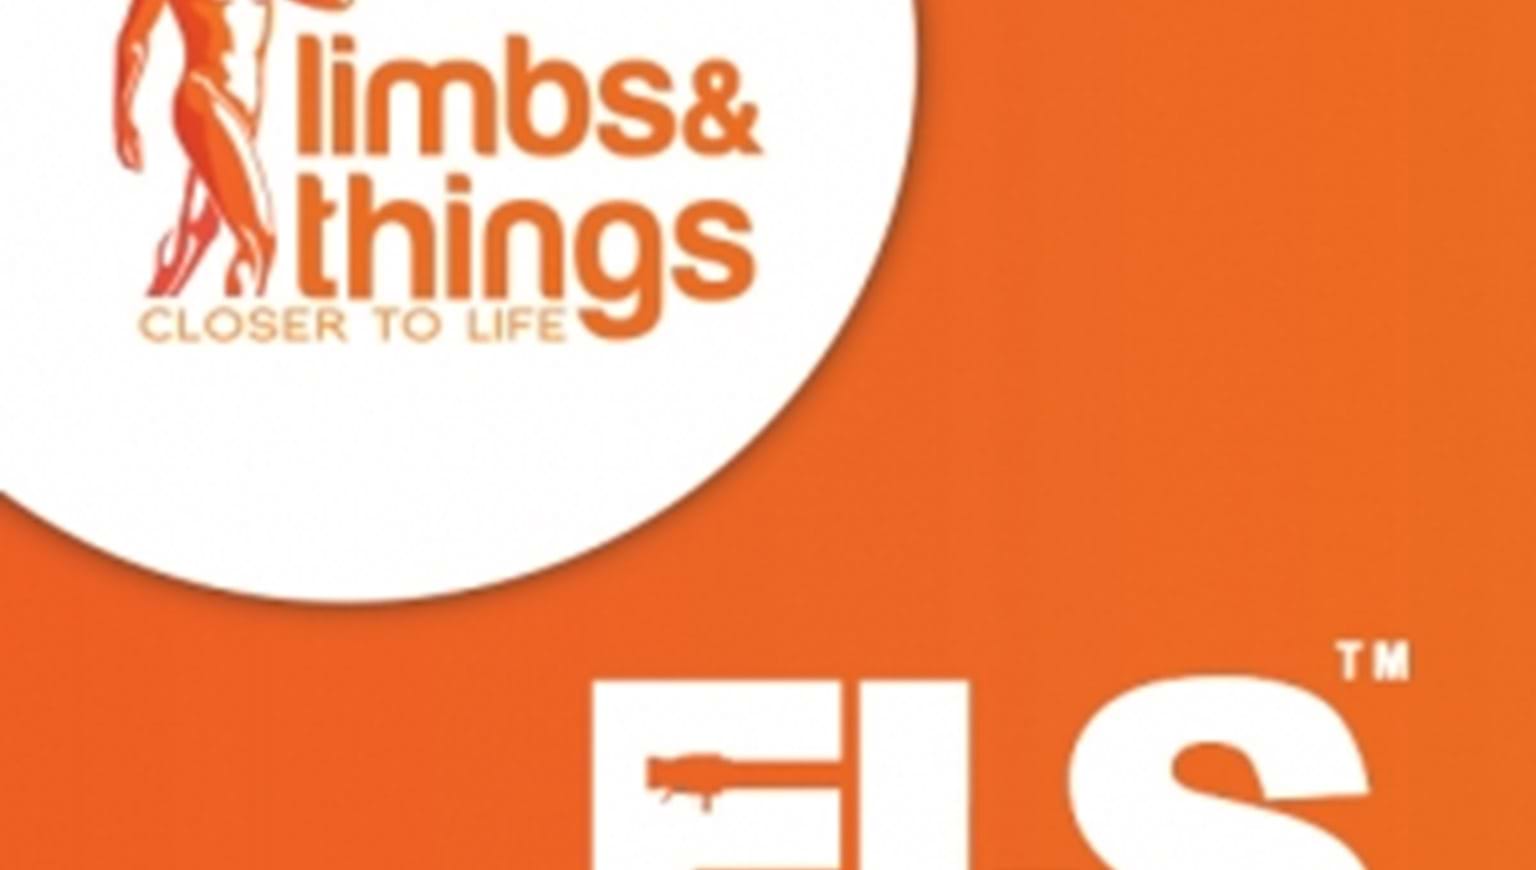 SAGES-ACS FLS Grants Limbs & Things Exclusive Rights For Sale of FLS Products